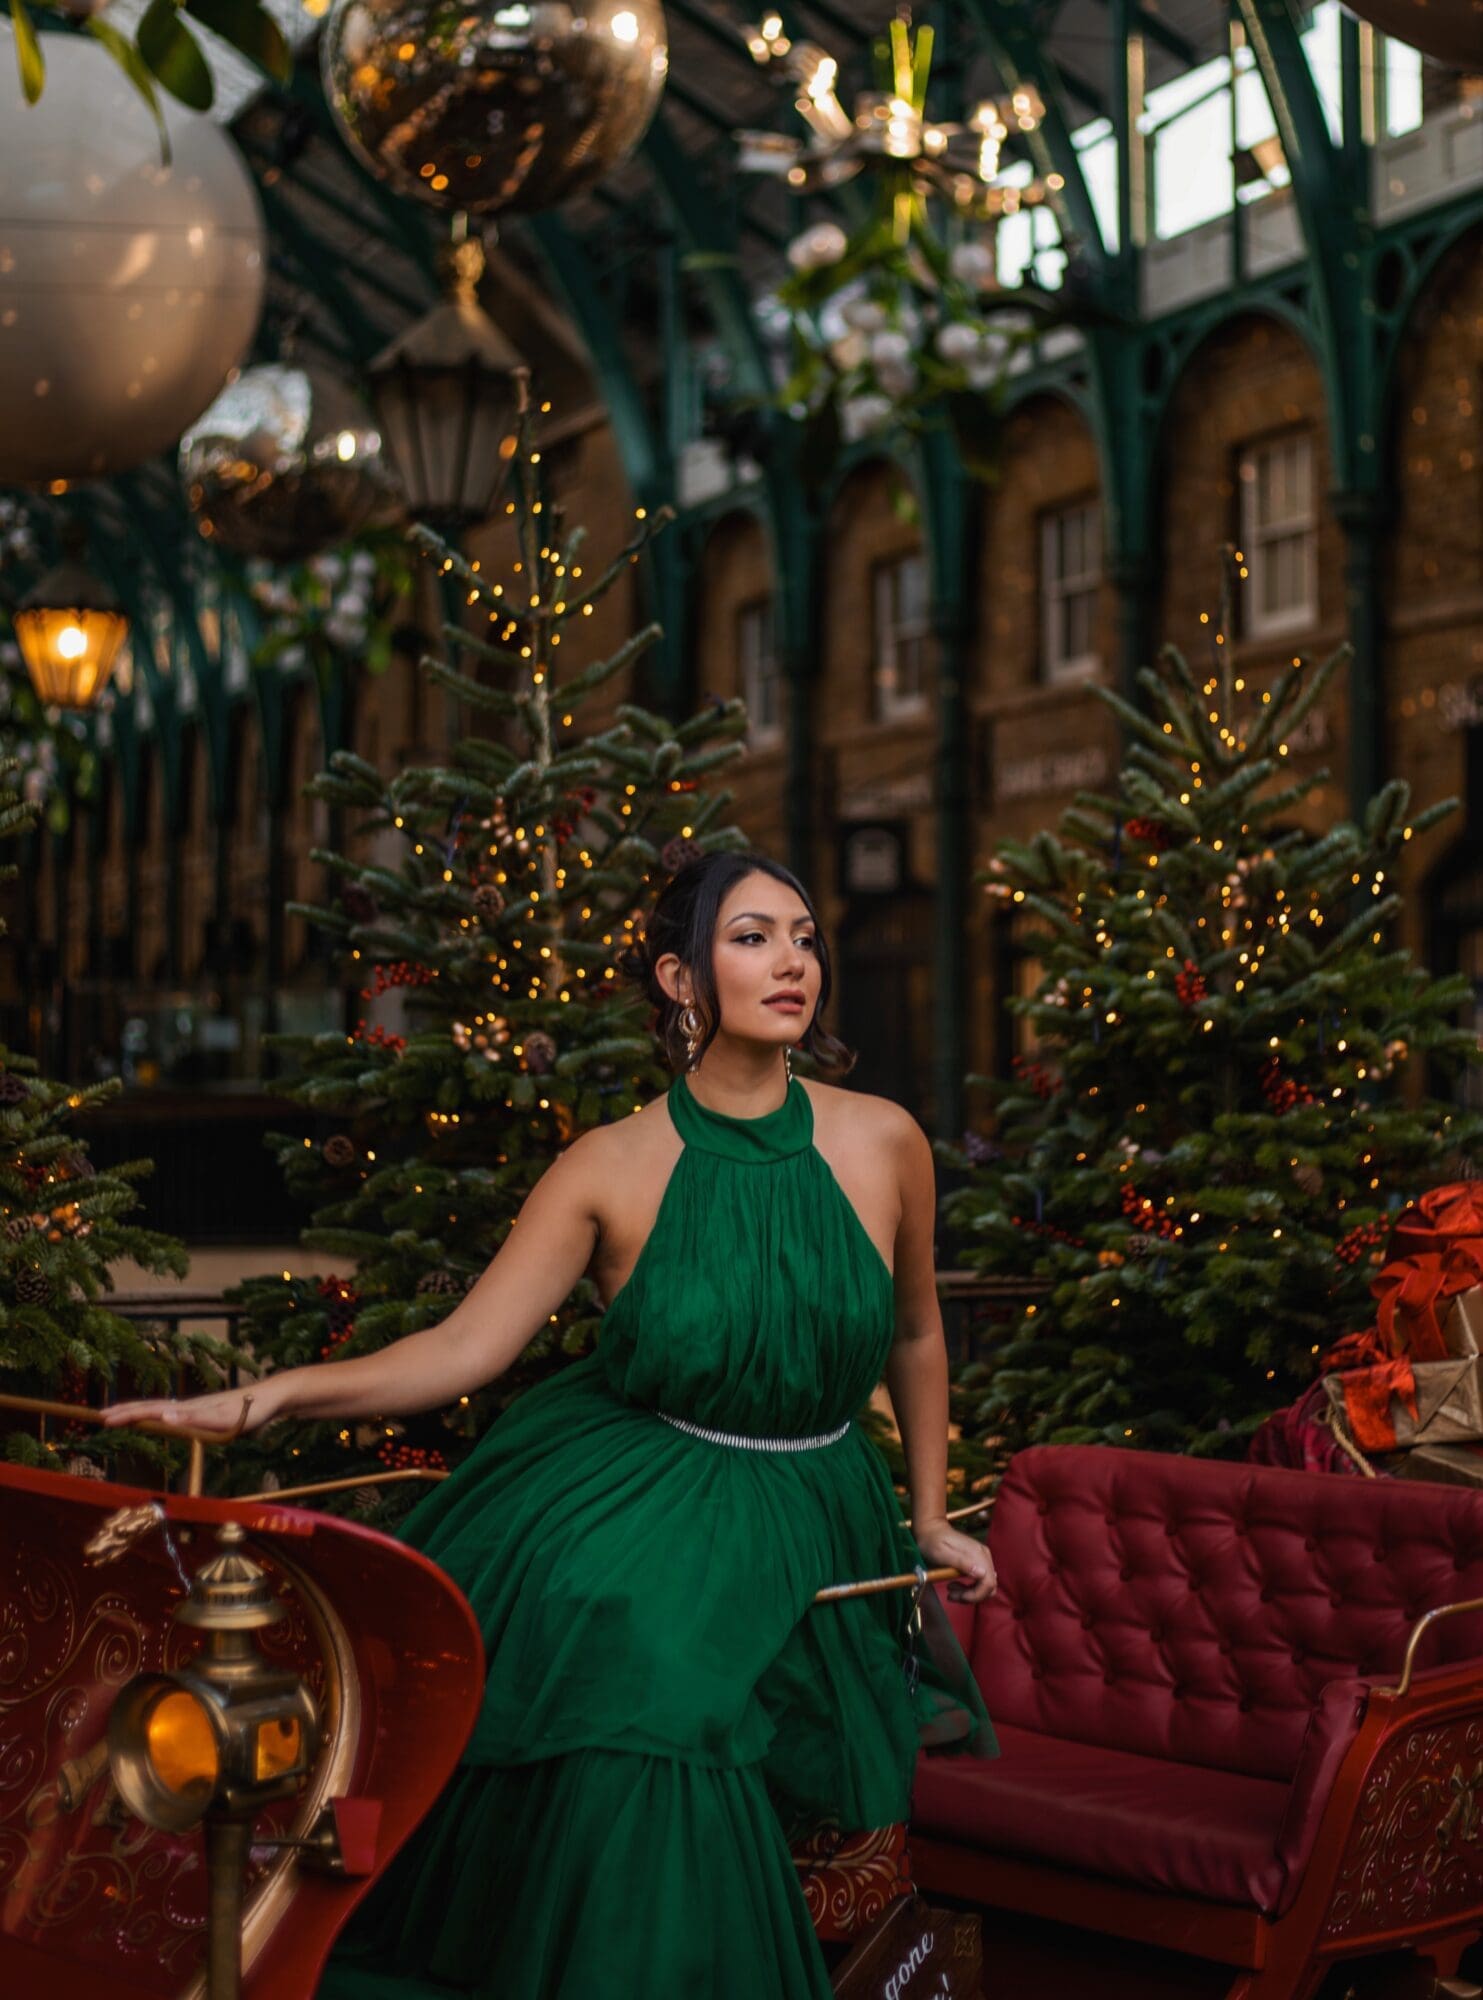 Covent Garden Piazza Christmas in London Display Instagram Photo Opp